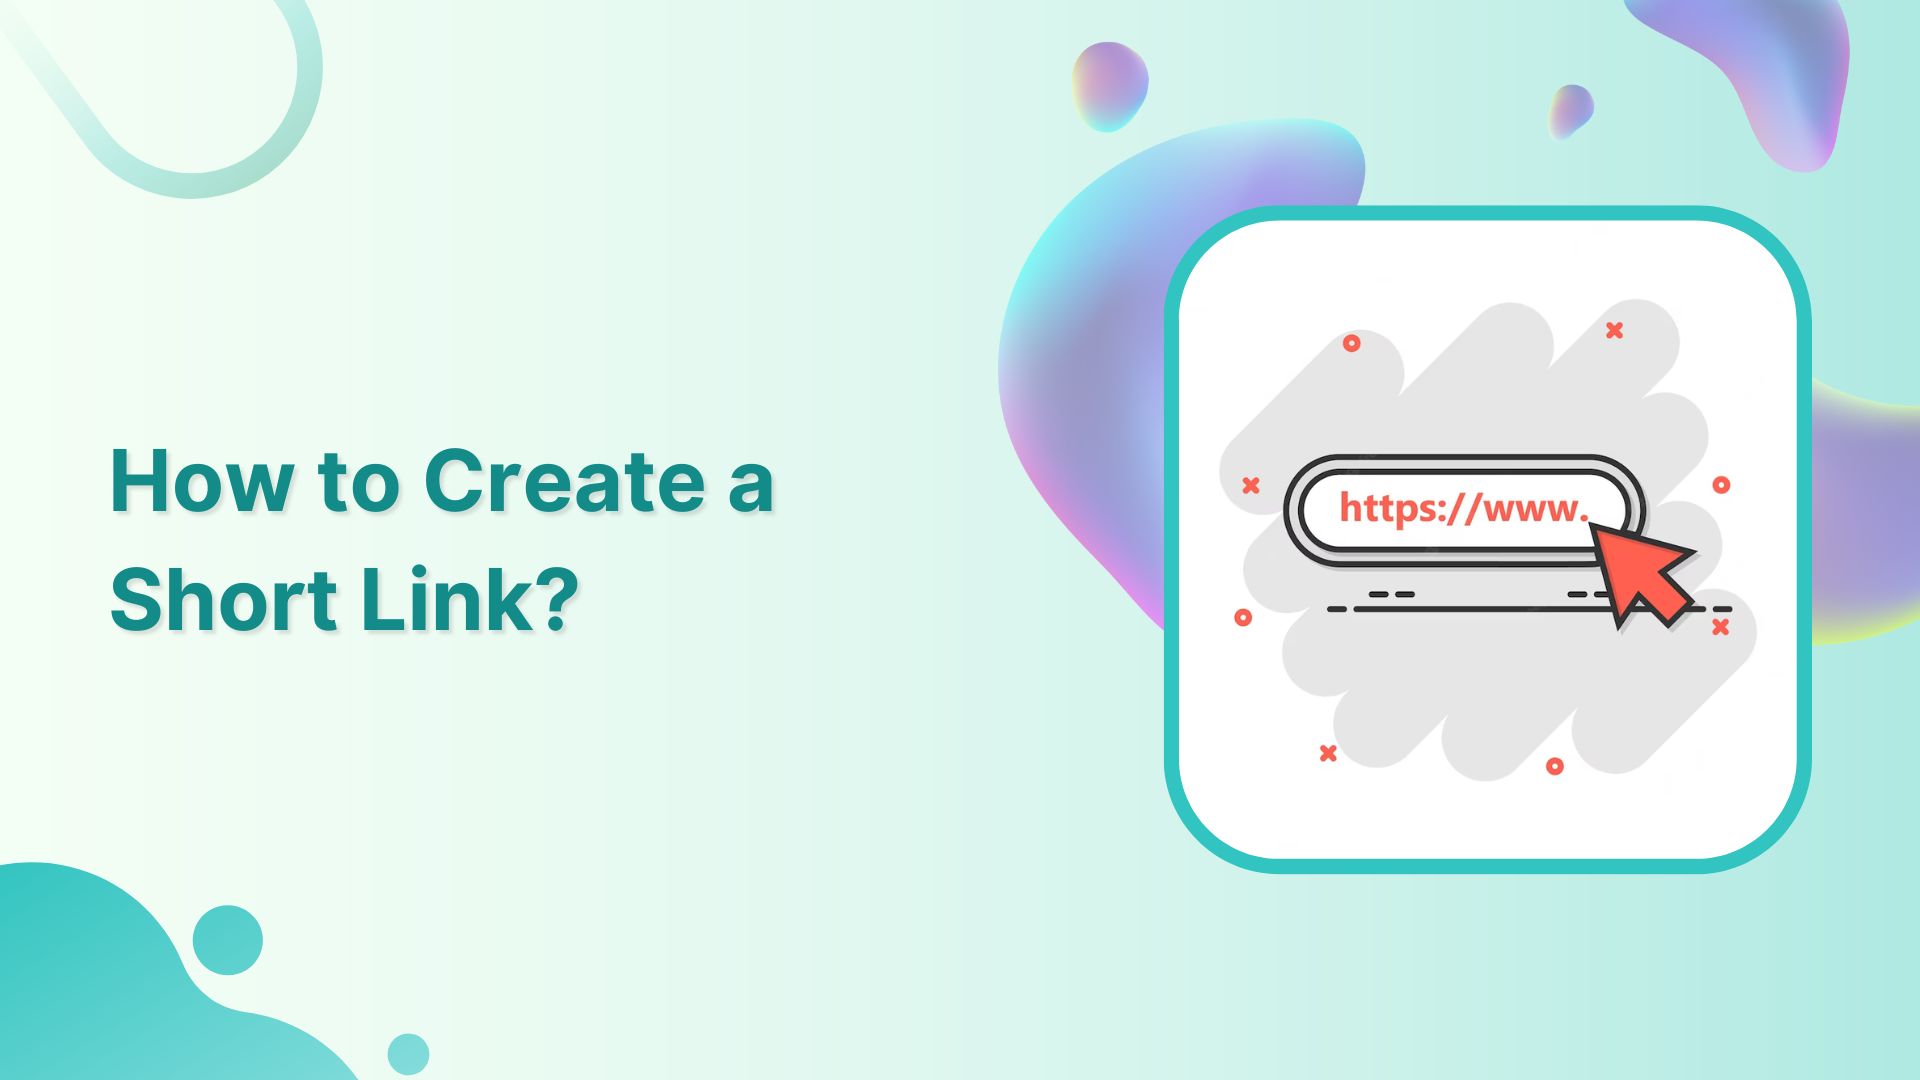 How to Create a Short URL: Step-by-Step Guide